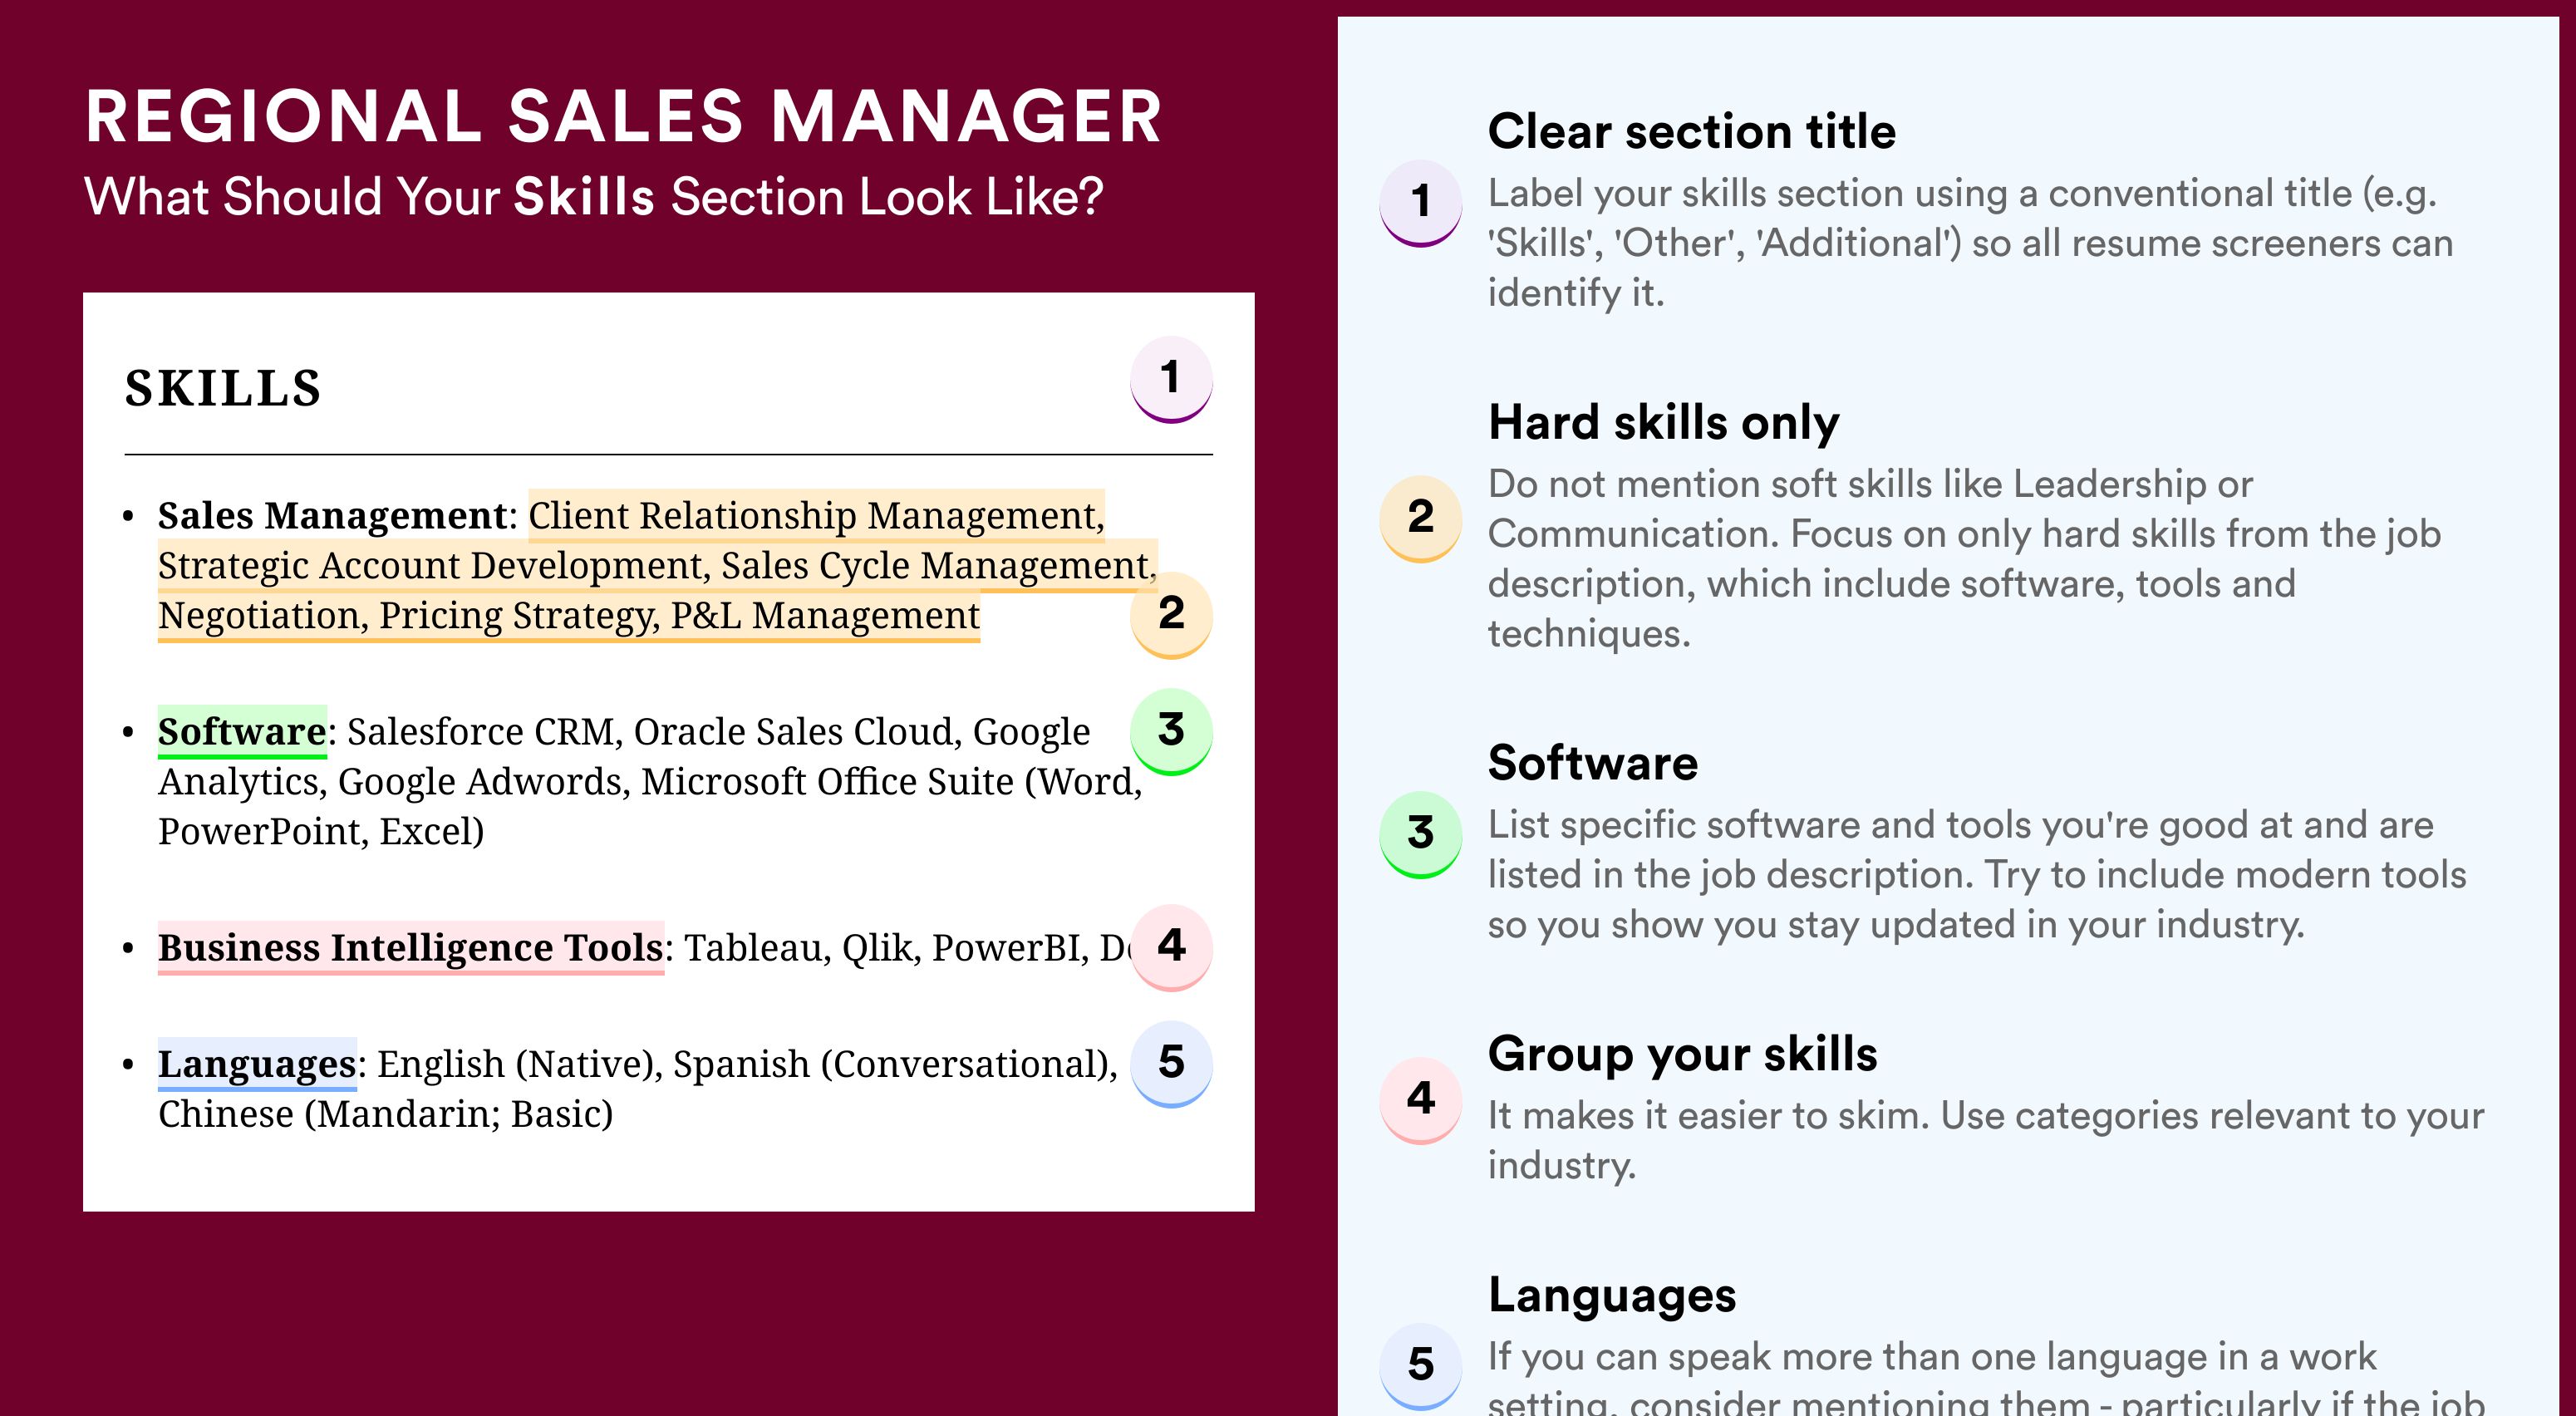 How To Write Your Skills Section - Regional Sales Manager Roles